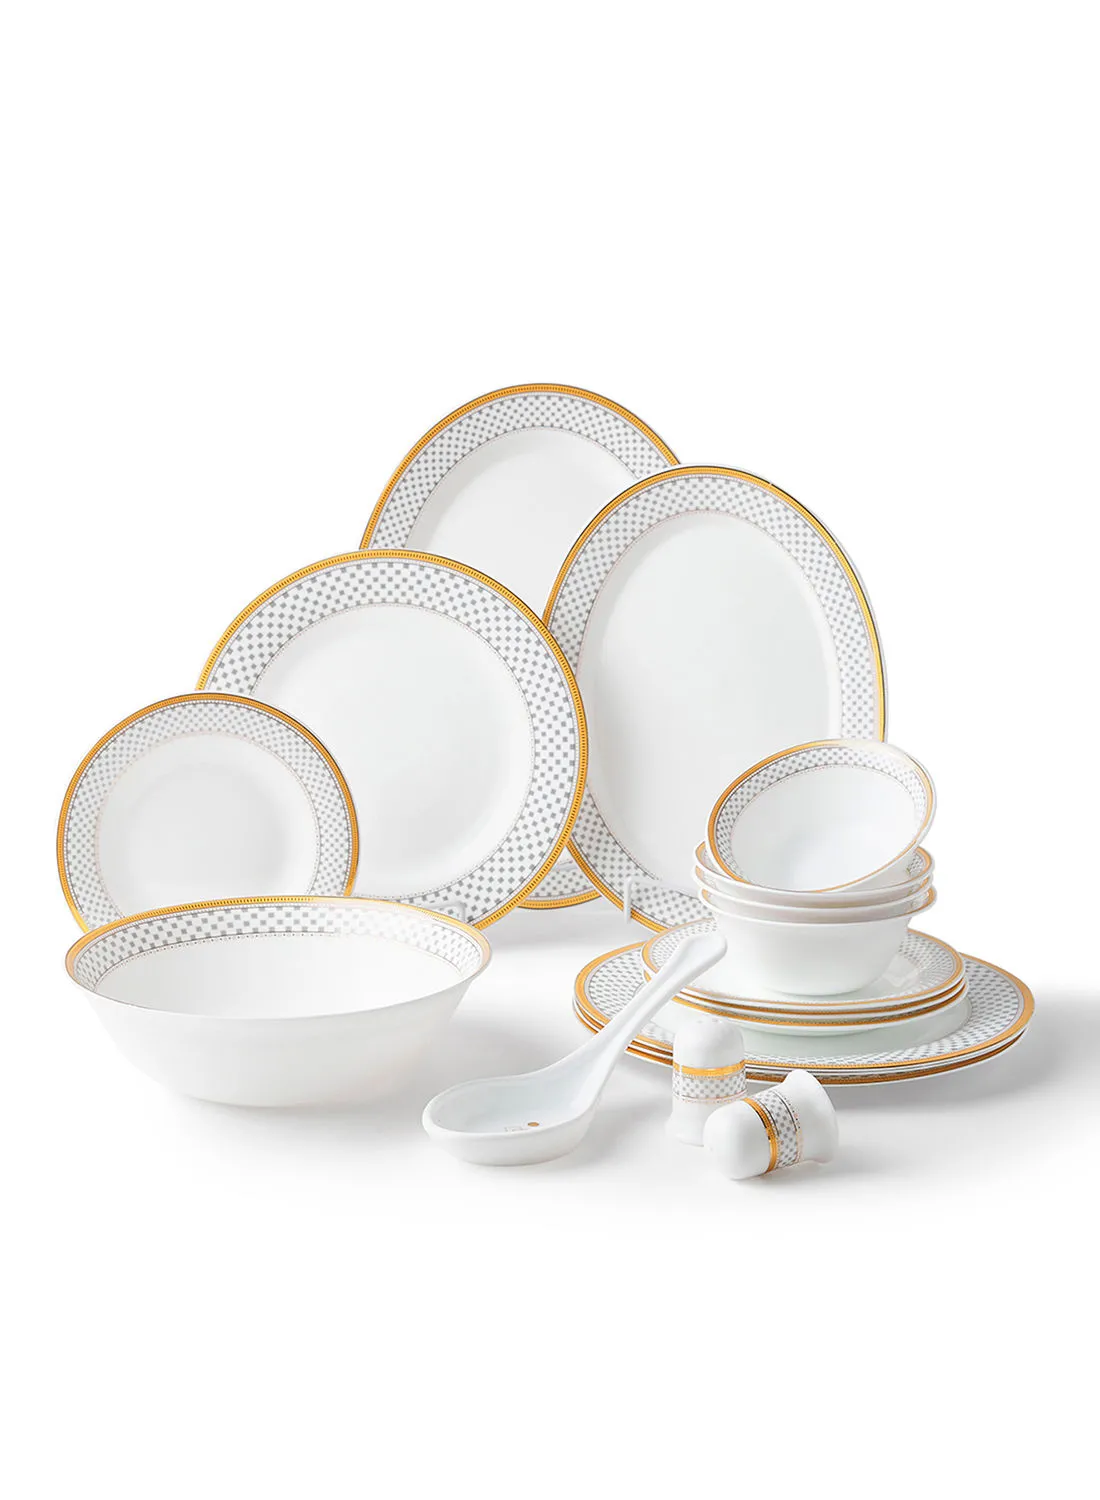 noon east 18 Piece Opalware Dinner Set - Light Weight Dishes, Plates - Dinner Plate, Side Plate, Bowl, Serving Dish And Bowl - Serves 4 - Festive Design Pixel Lace Gold